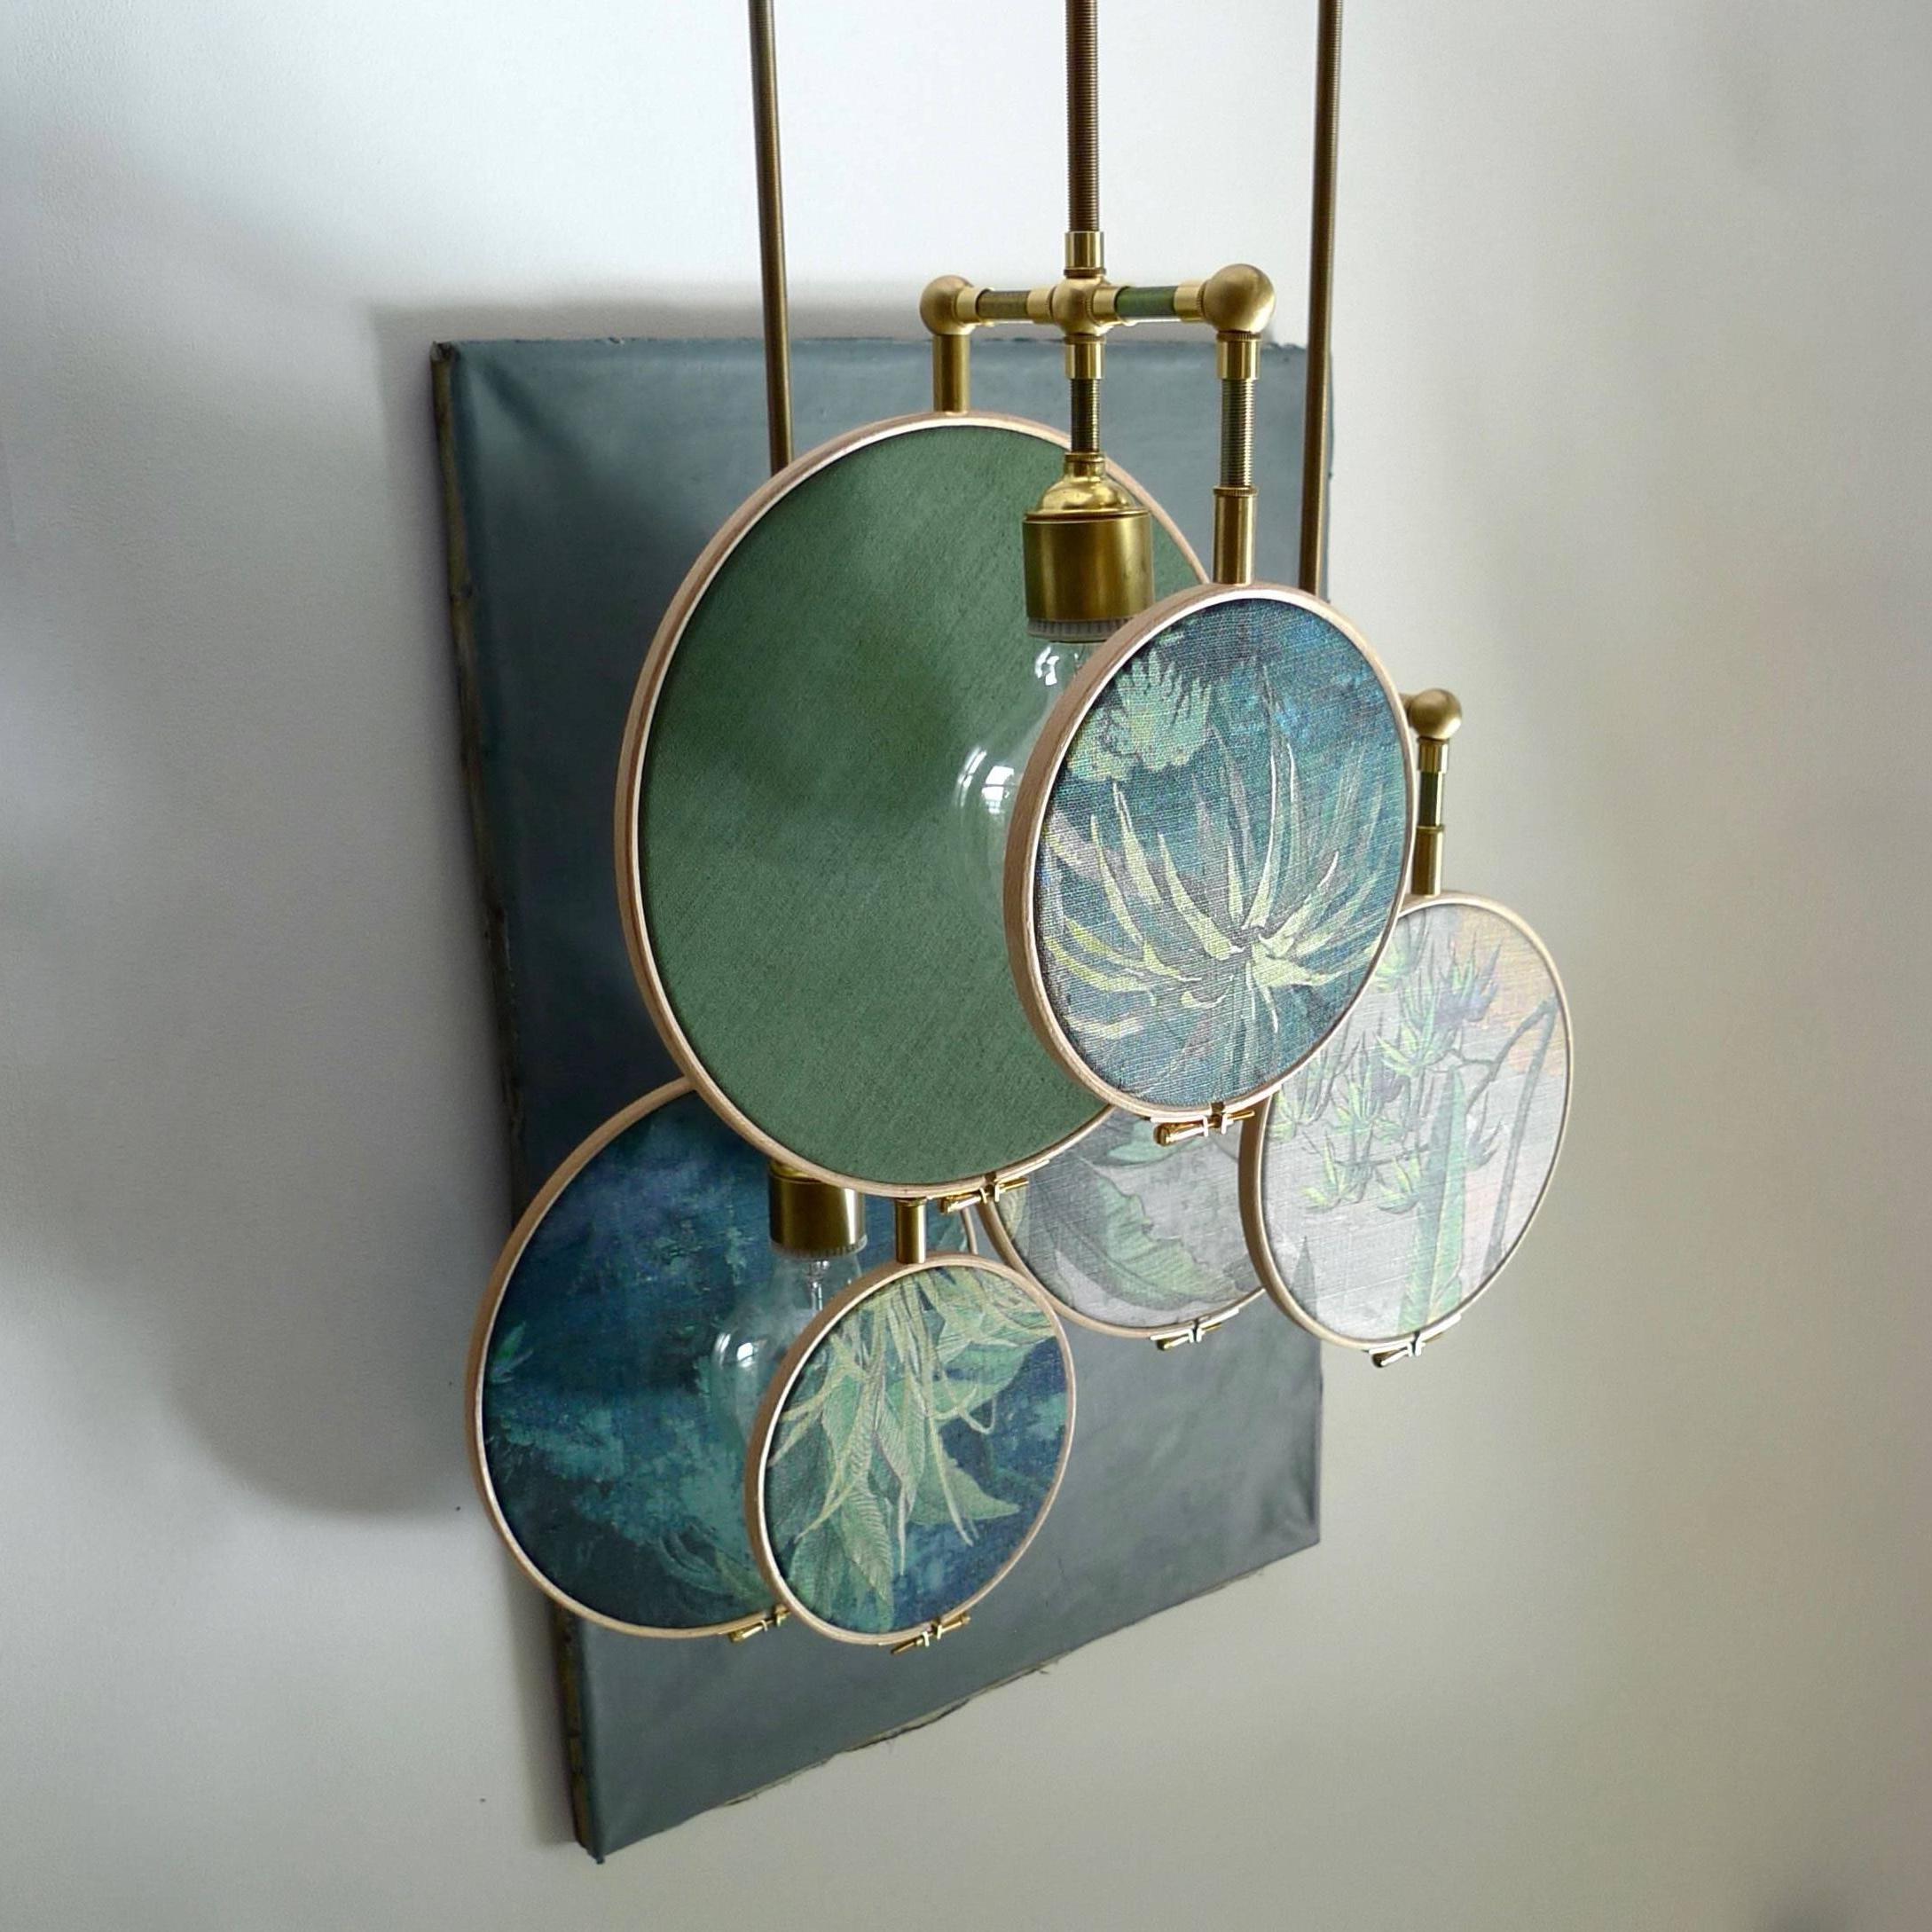 Ensemble of Three Circle Wall Sconce by Sander Bottinga
Light object, ceiling lamp, circle blue grey
Handmade in brass, leather, wood and hand printed and painted linen.
A dimmer is inlaid with leather
Dimensions:
H custom size x W 27 x D 16 cm
The